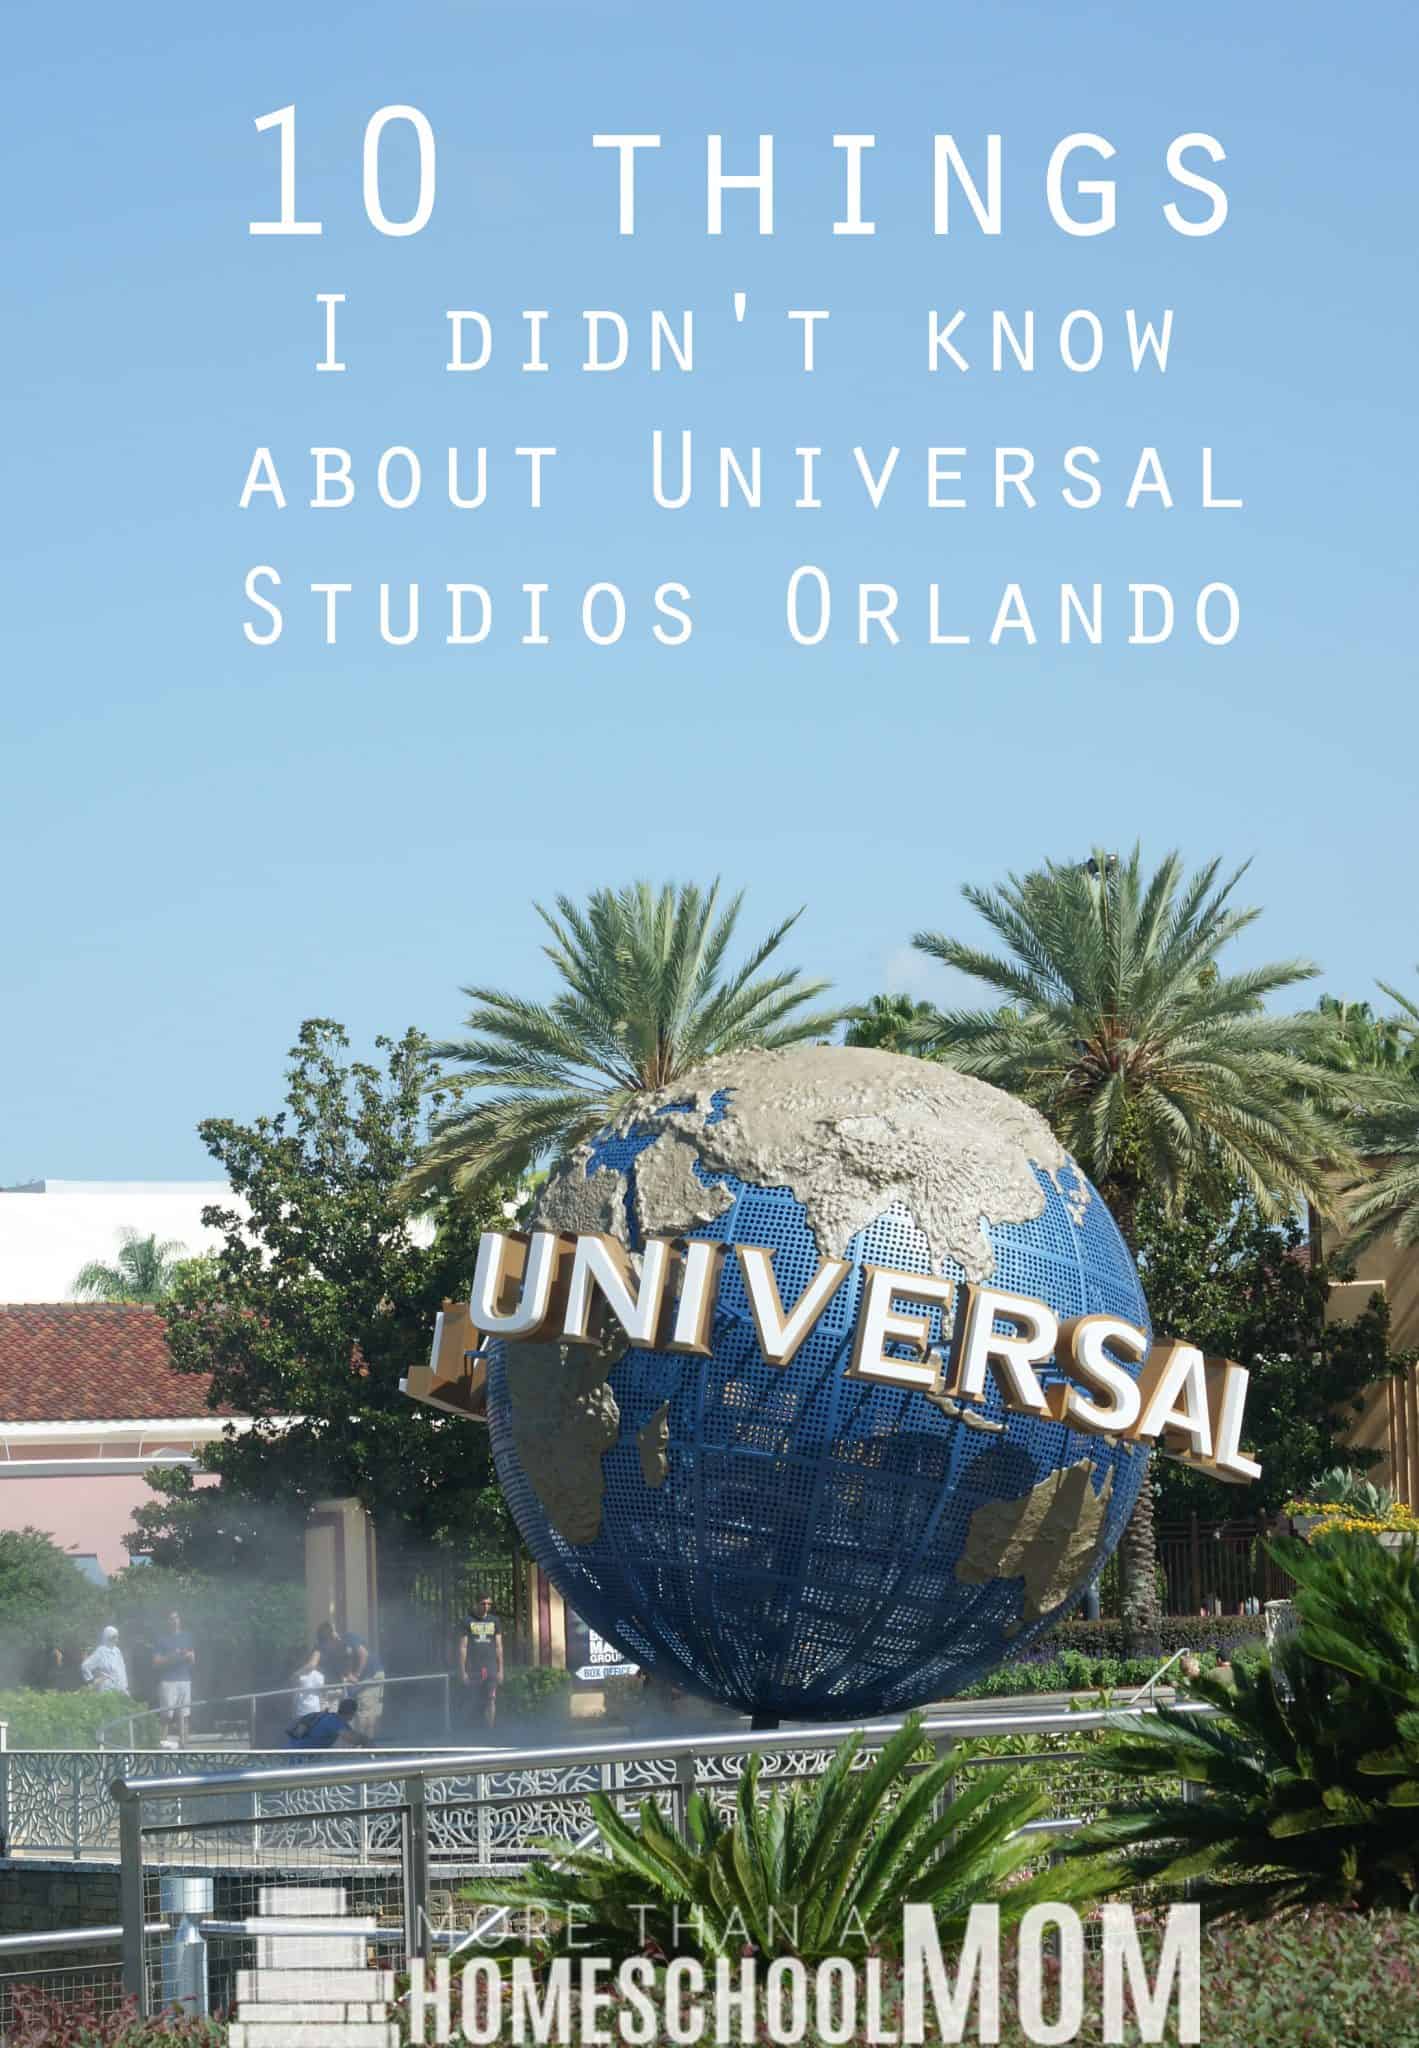 10 Things I didn't know about Universal Studios Orlando